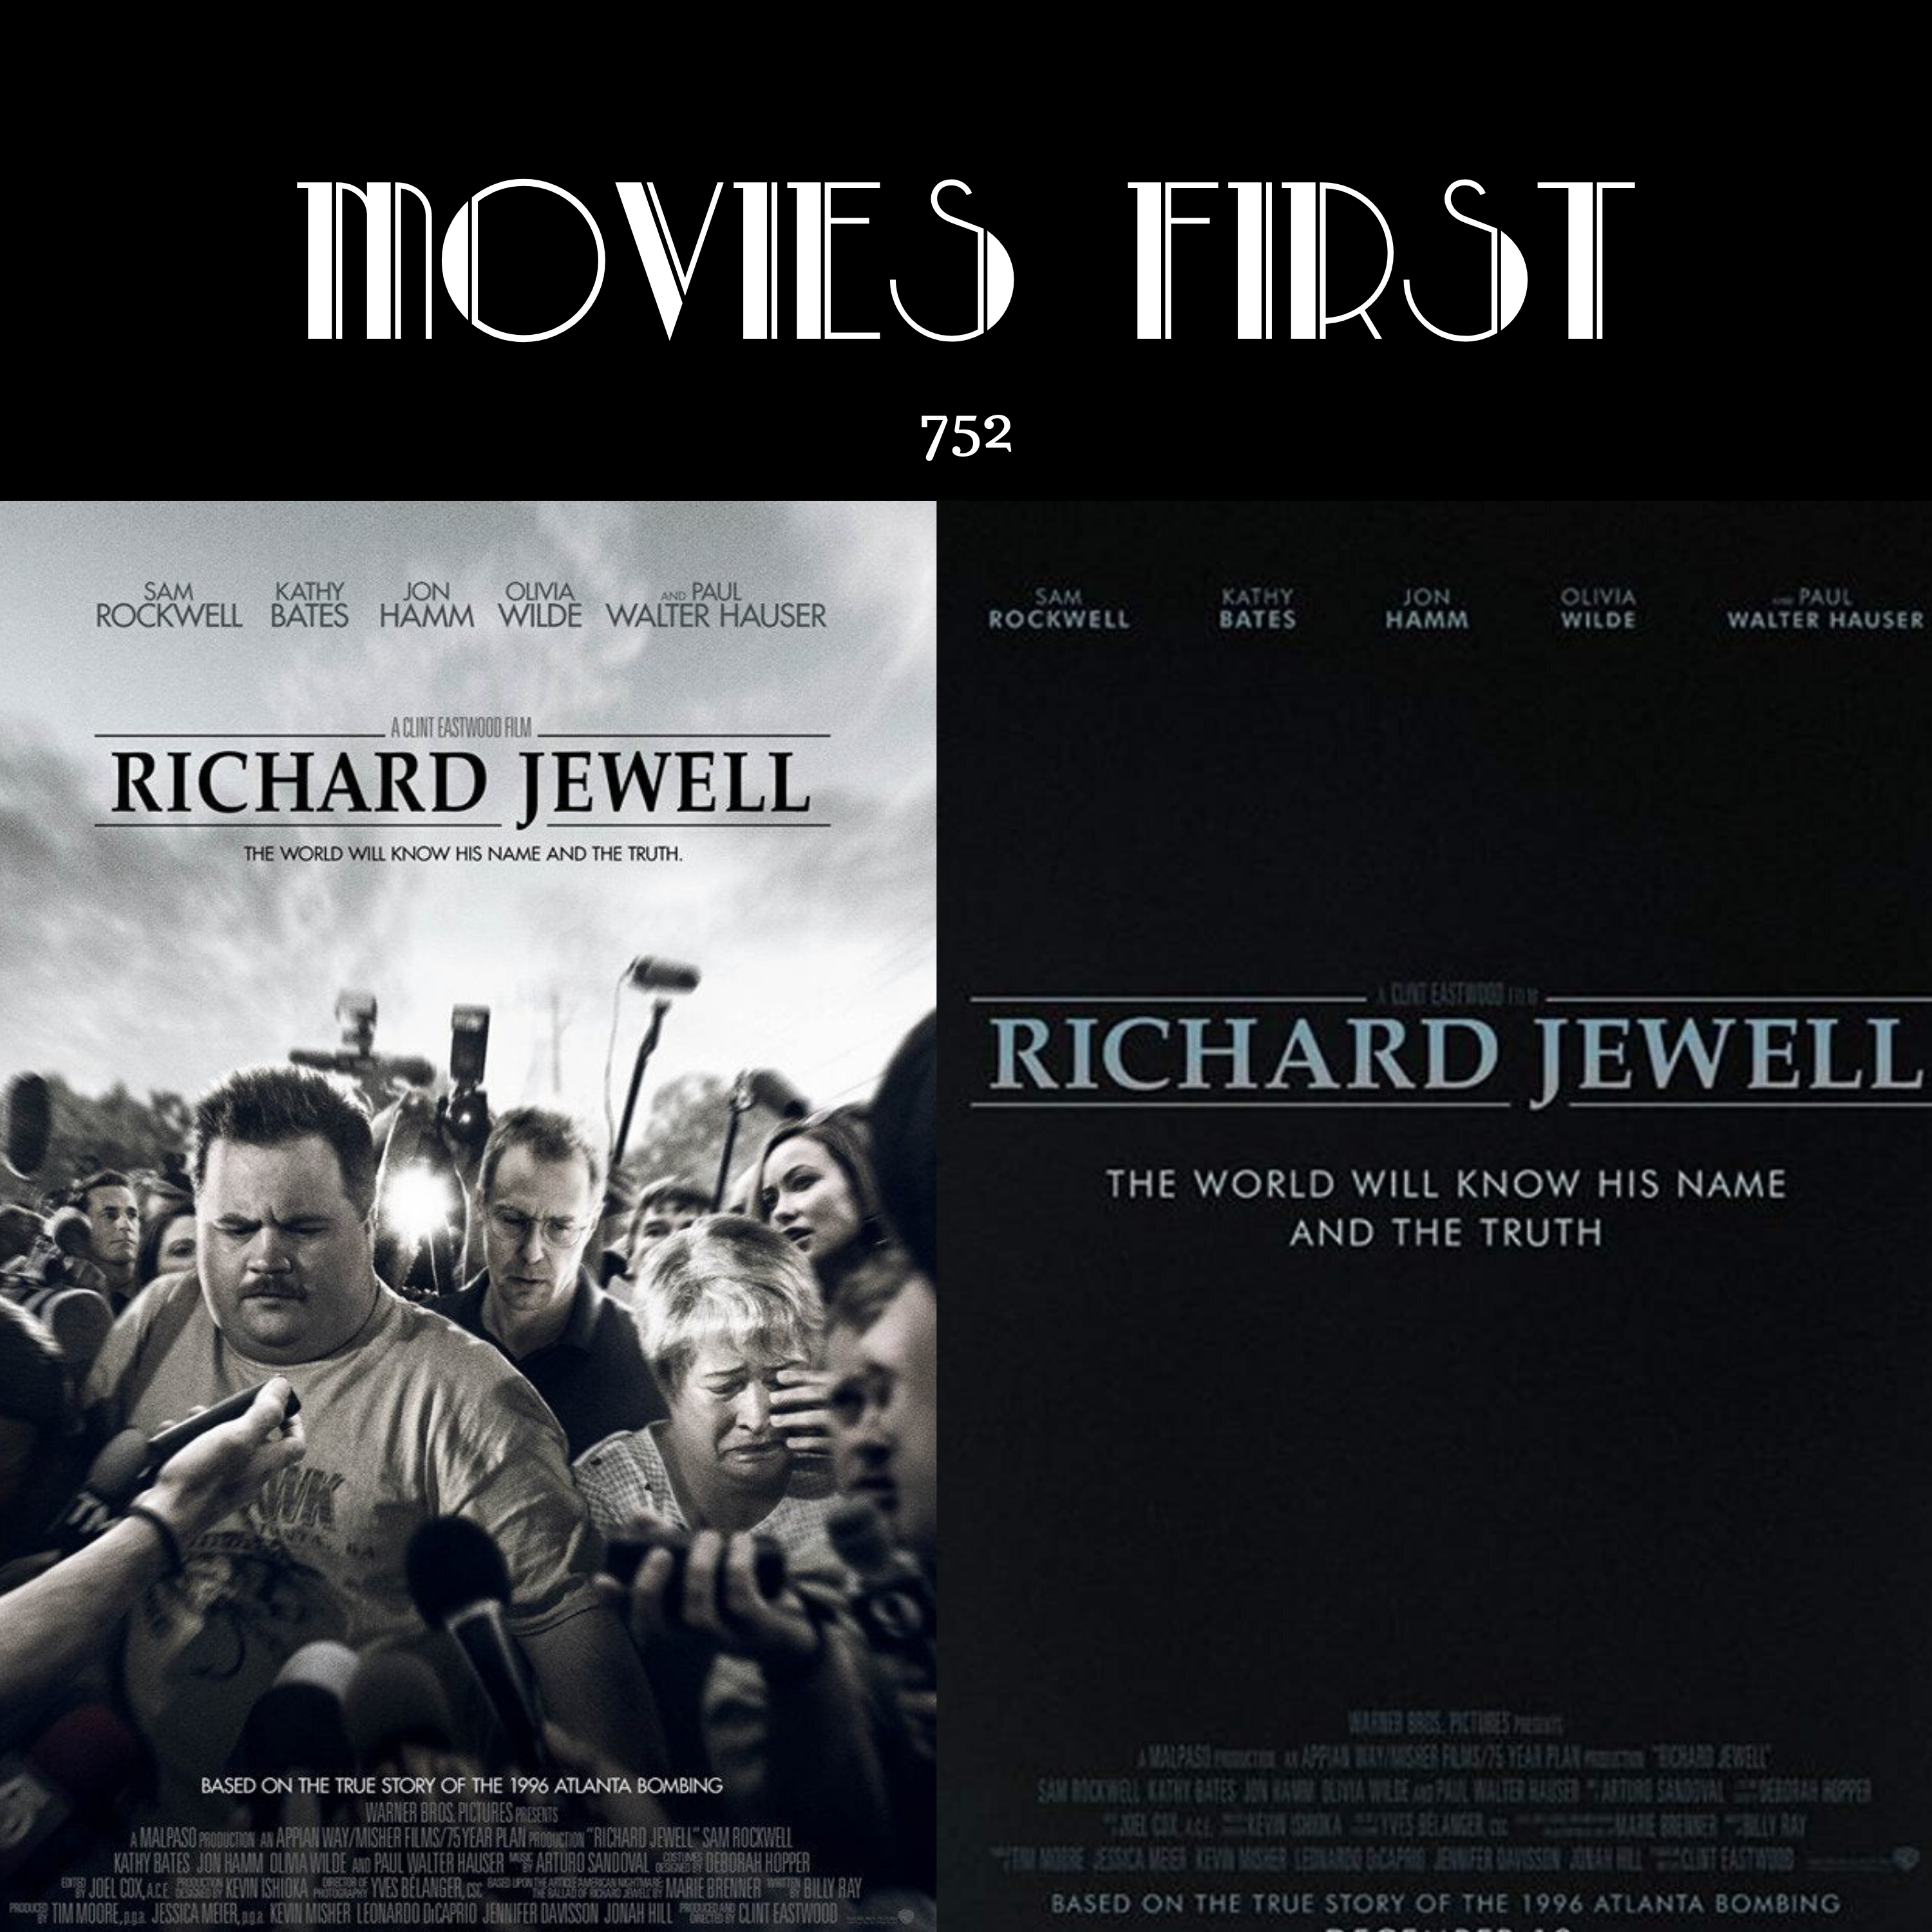 752: Richard Jewell (the MoviesFirst review)